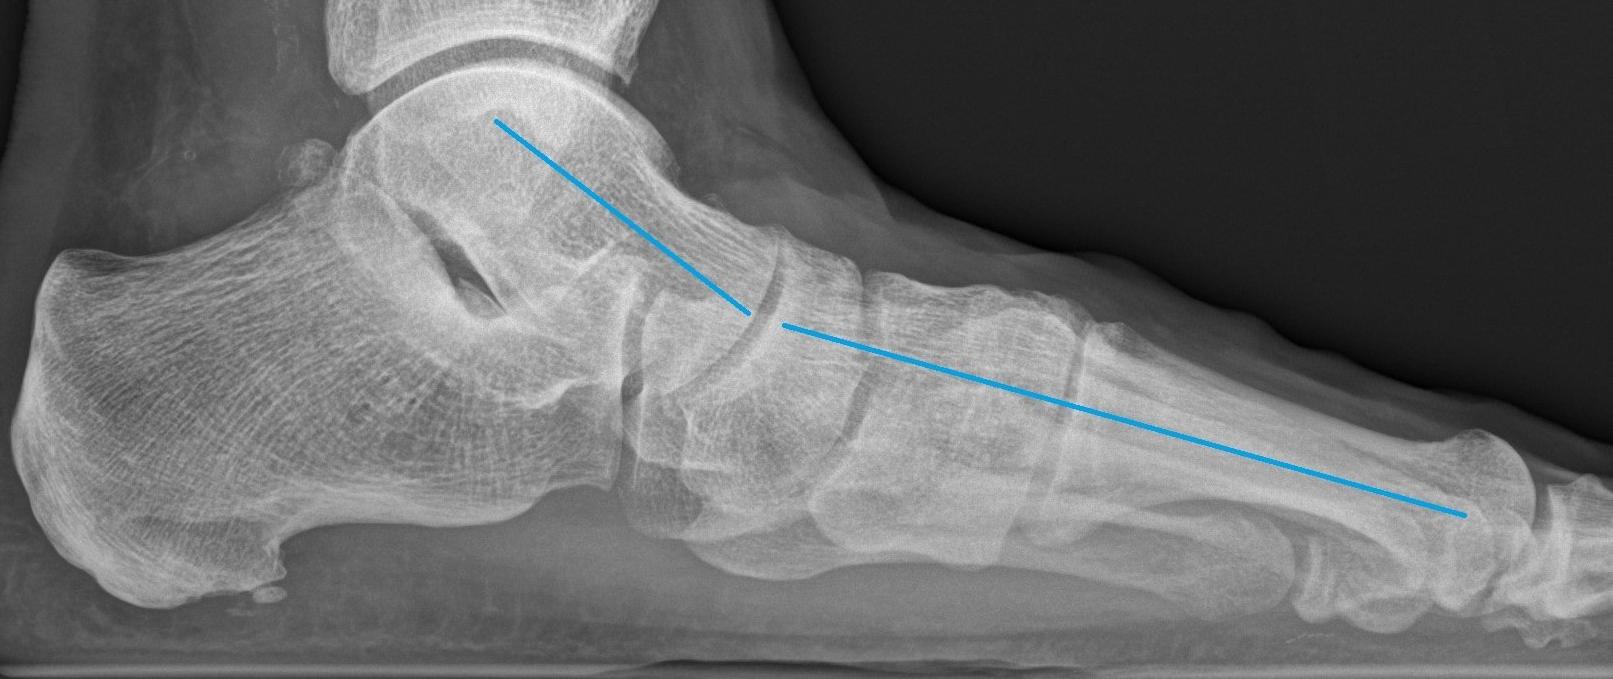 Flat foot reconstruction recovery